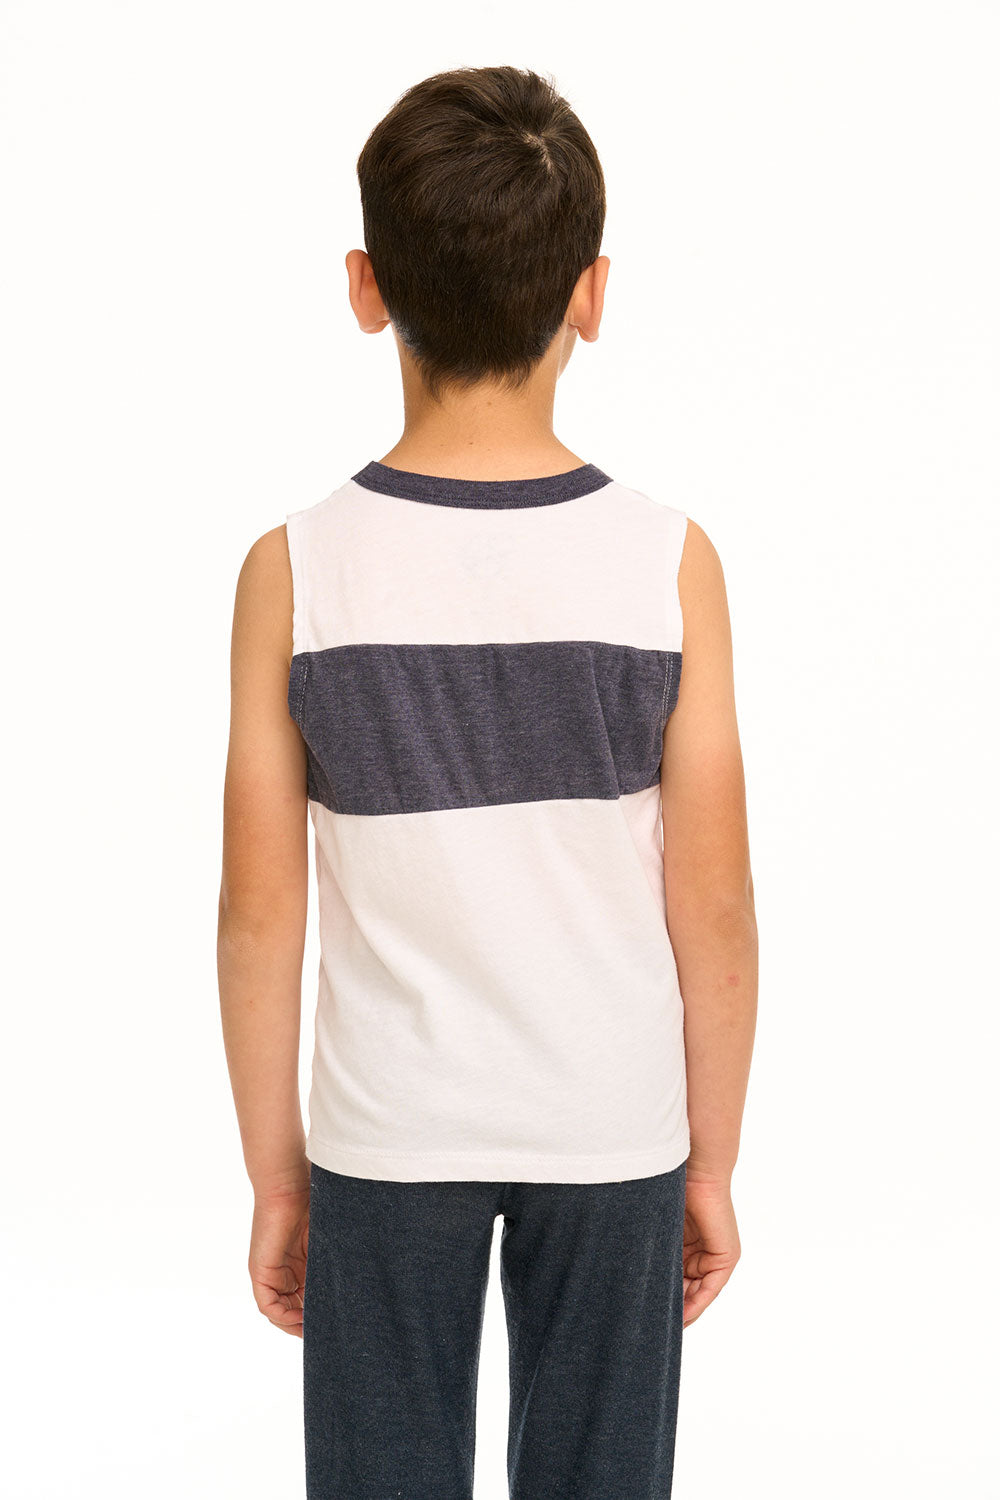 Rad Blocked Muscle Tank BOYS chaserbrand